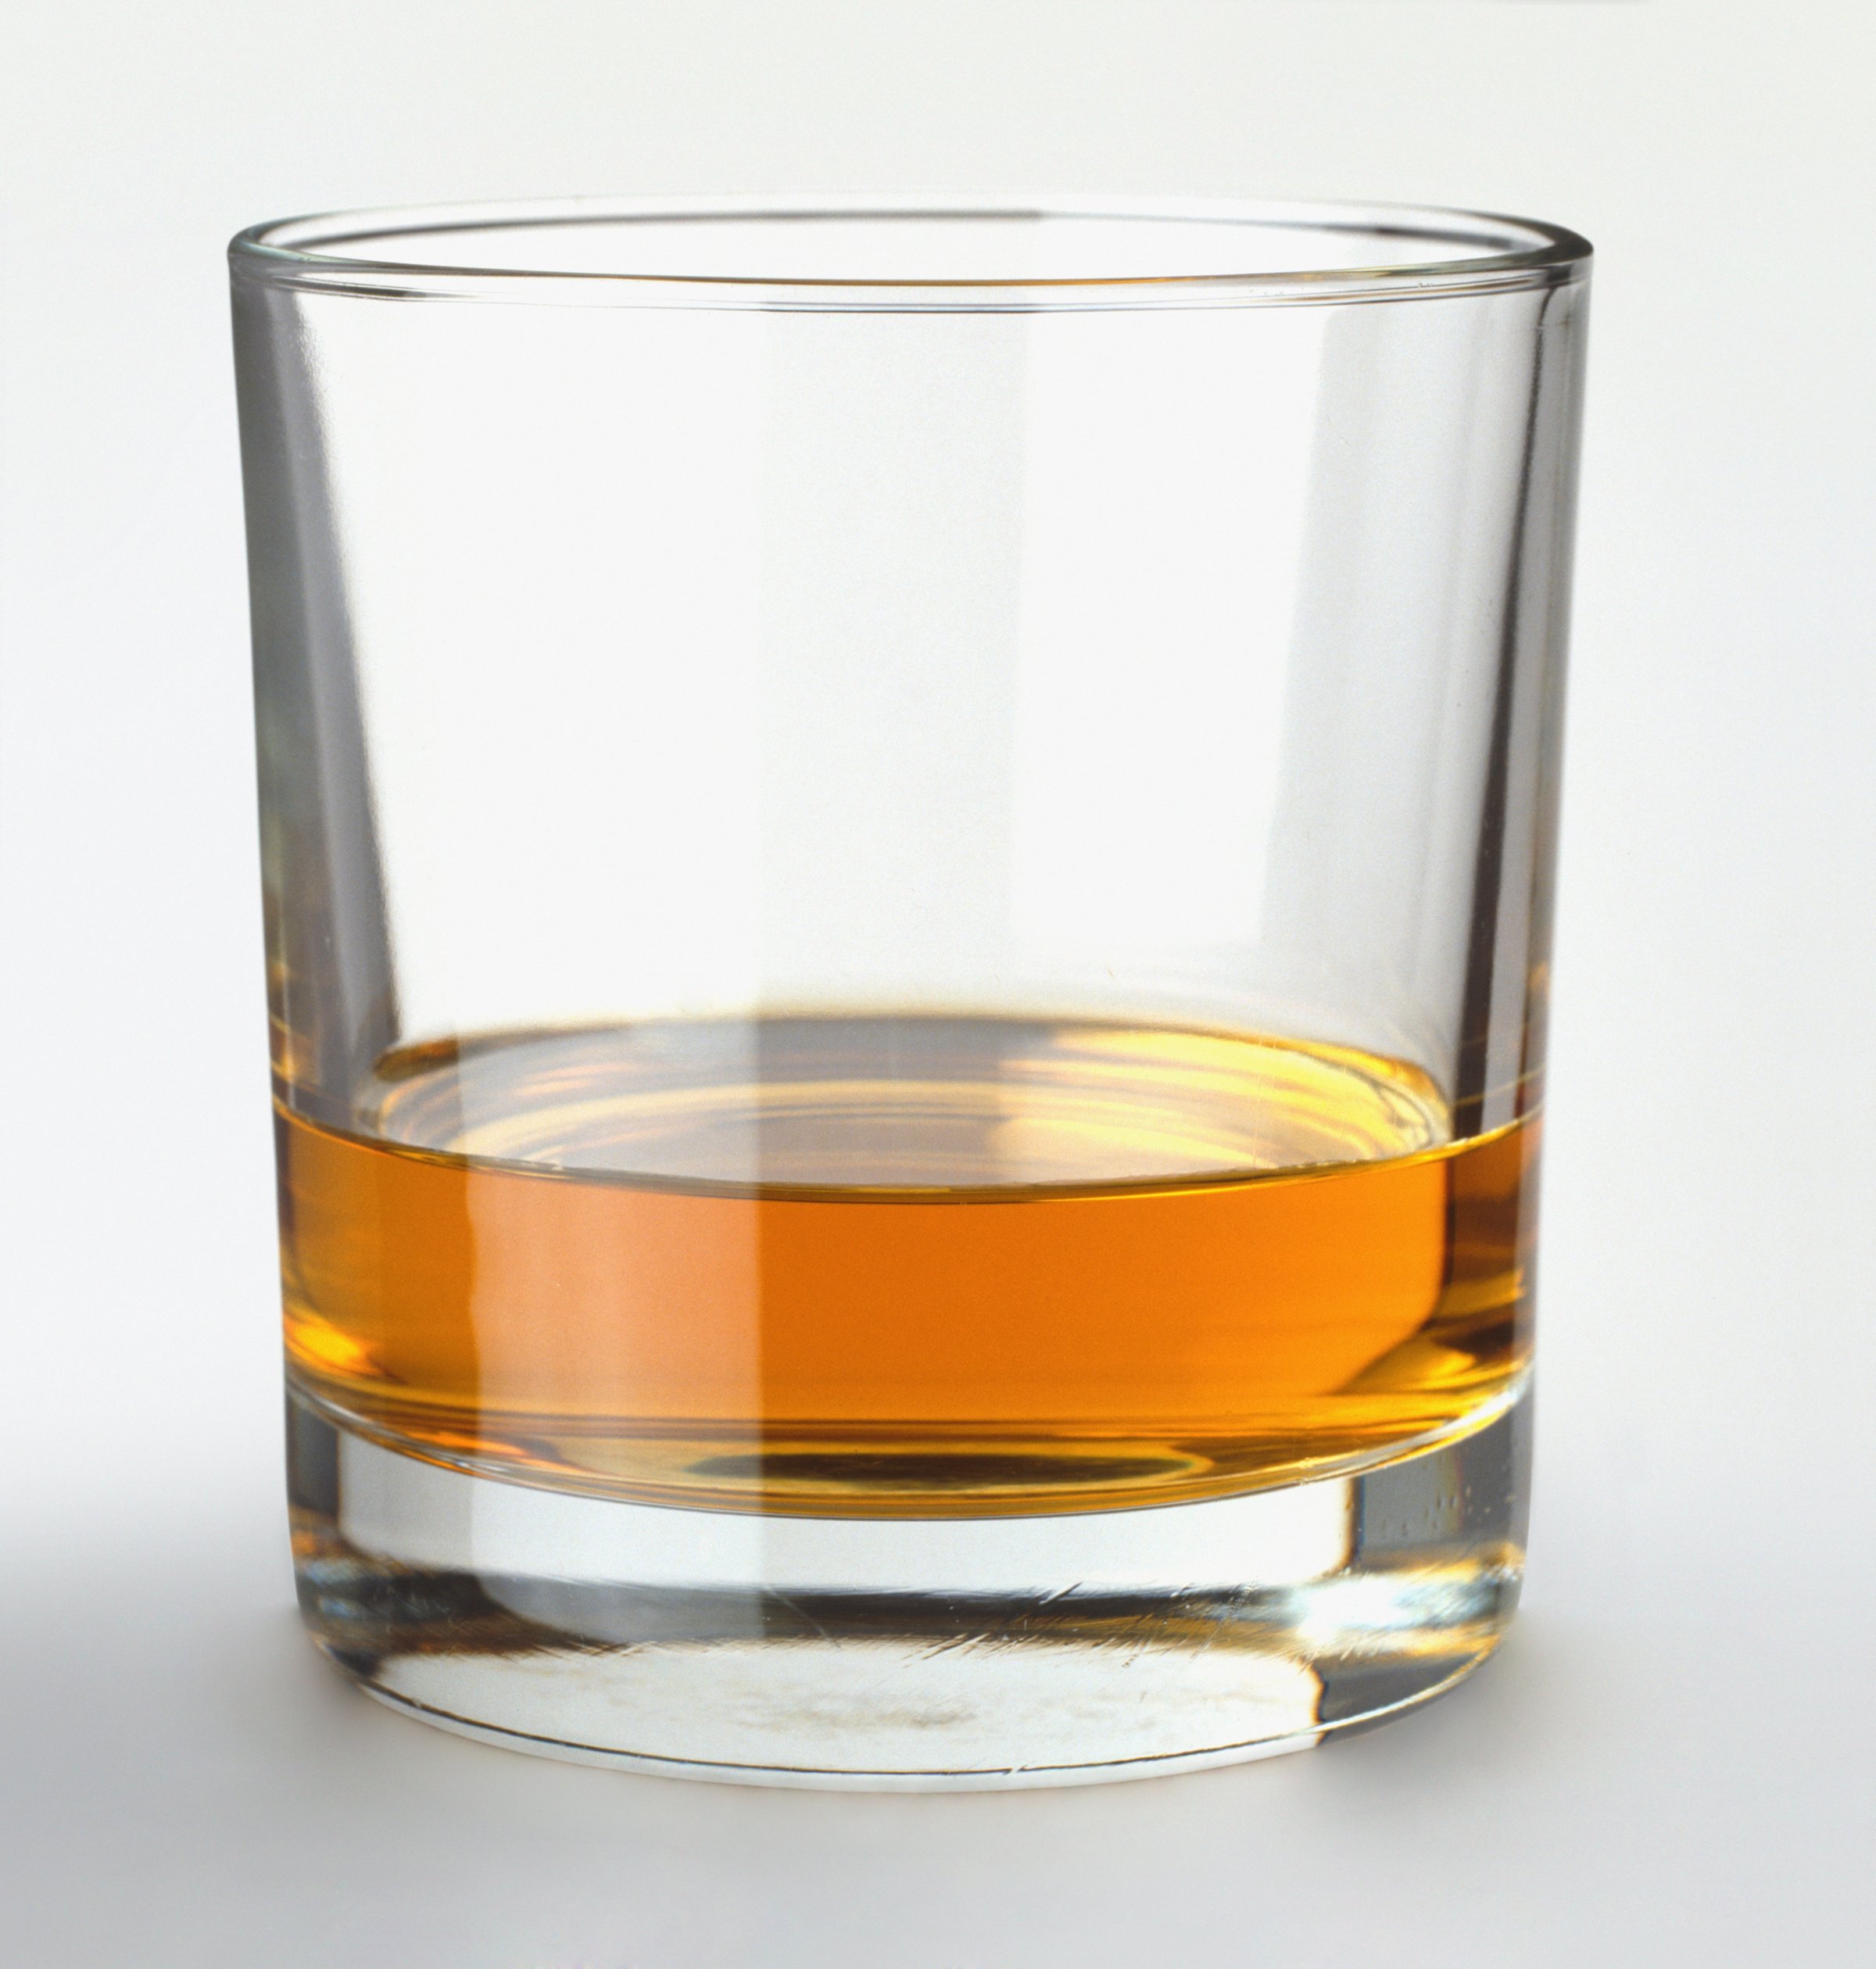 Glass of whiskey, close up, front view.